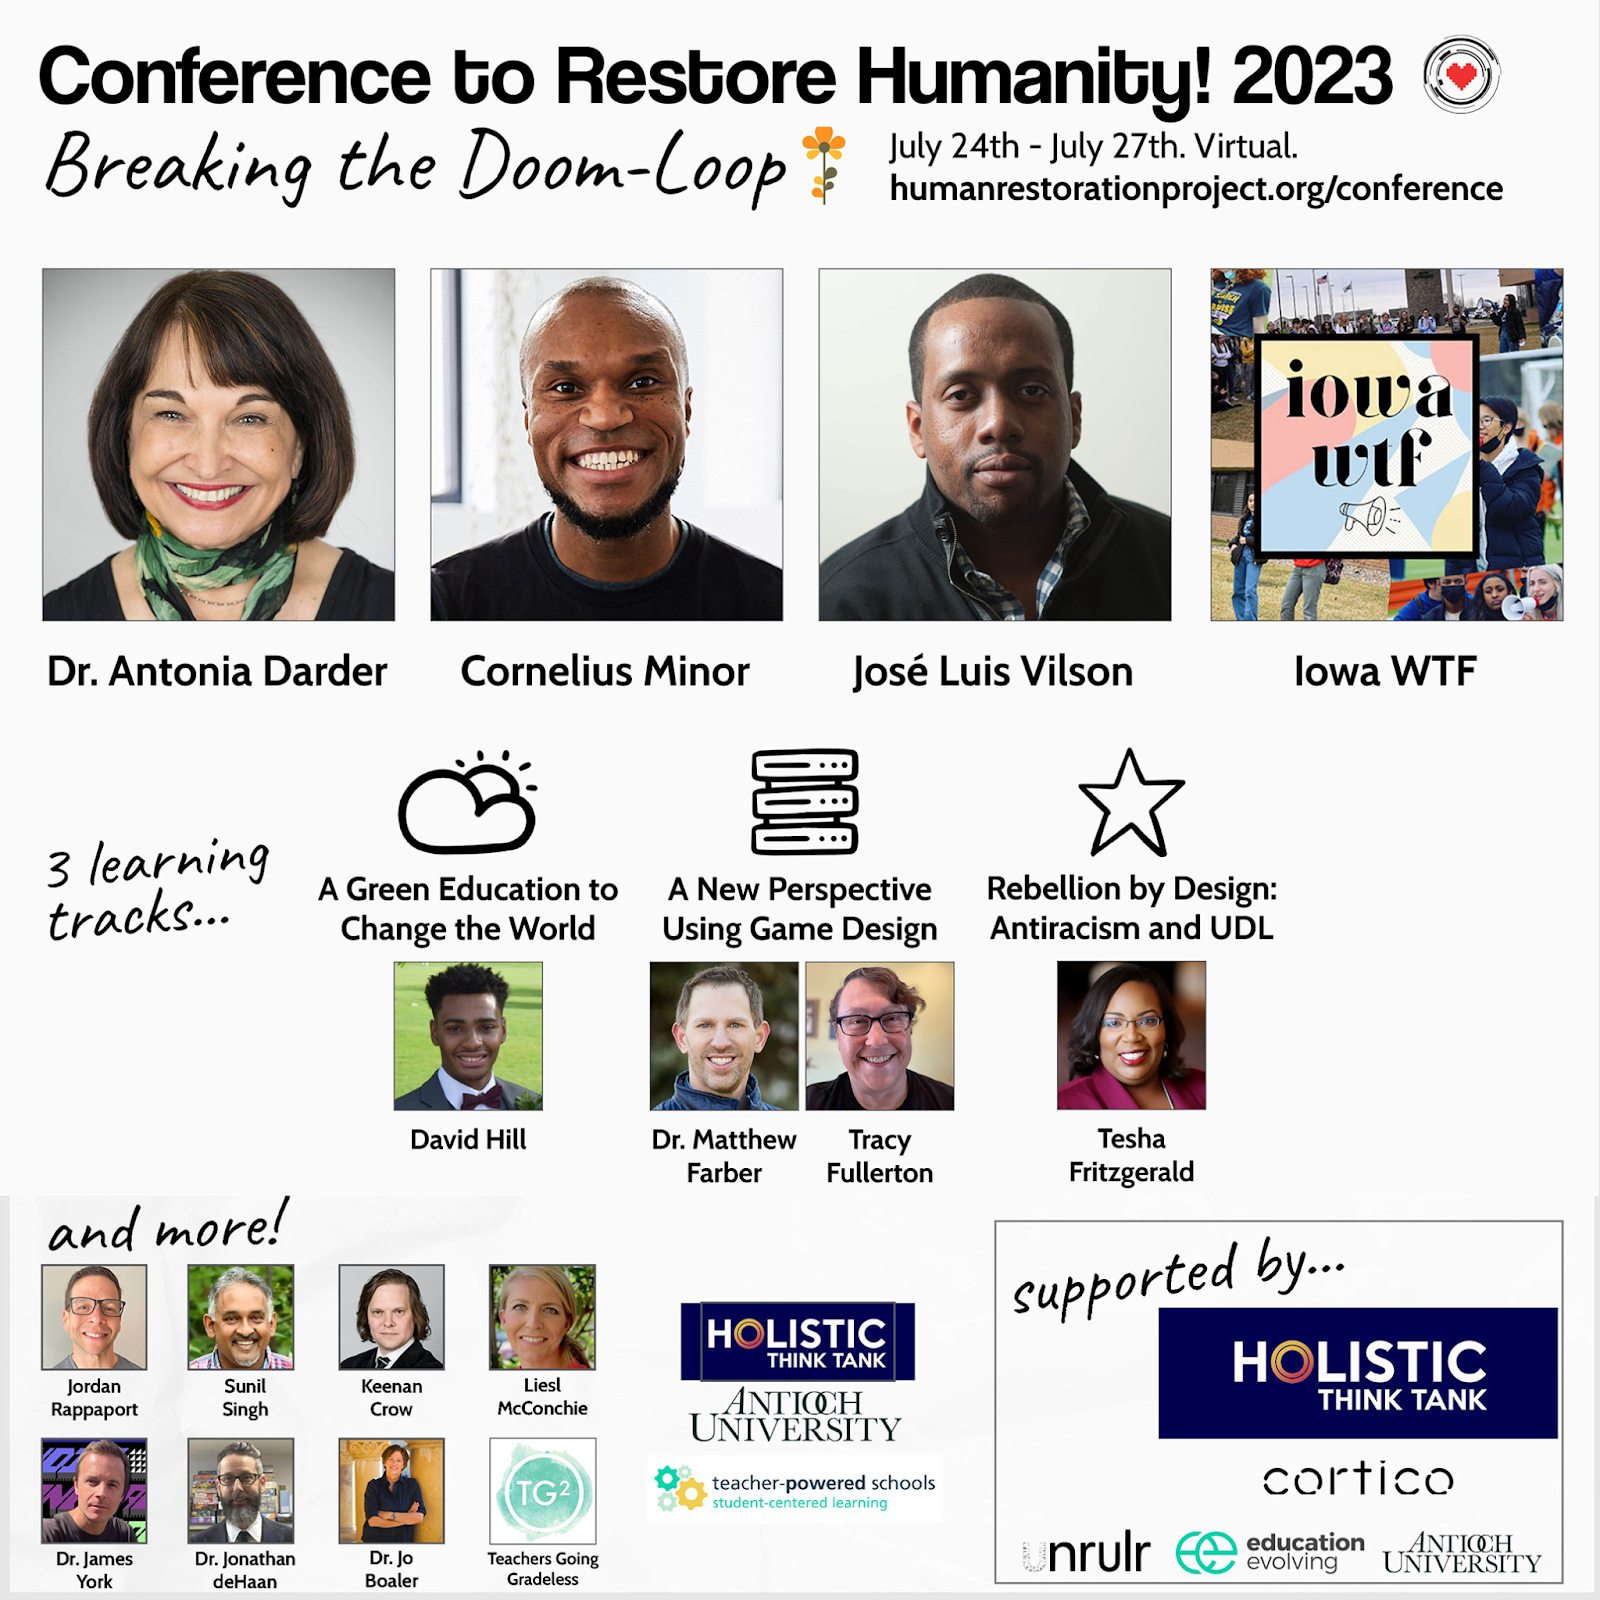 Conference to Restore Humanity! 2023: Breaking the Doom-Loop featuring Dr. Antonia Darder, Cornelius Minor, Jose Luis Vilson, and Iowa WTF, with 3 learning tracks: A Green Education to Change the World, A New Perspective Using Game Design and Rebellion by Design: Antics and UDL. Sponsored and featuring events by Holistic Think Tank, Antioch University, Education Evolving, Unrulr, and Cortico.